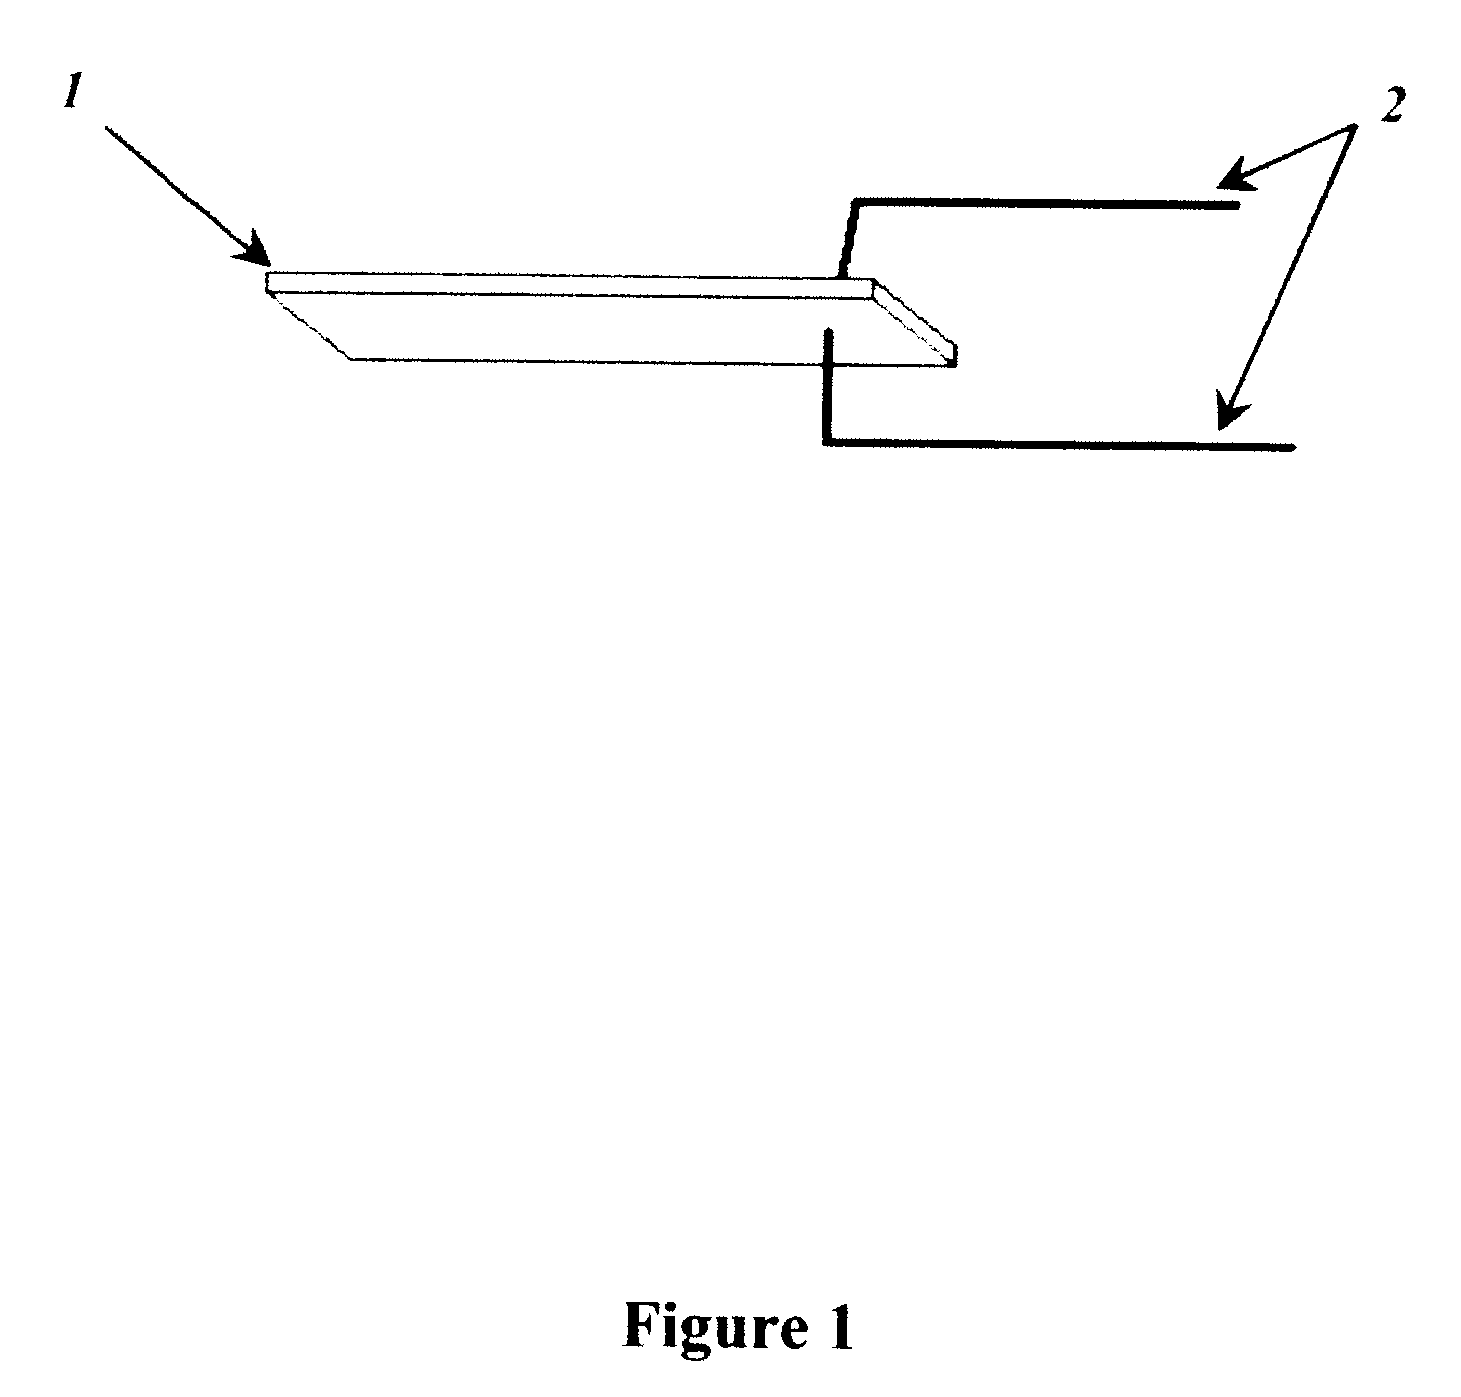 Direct assembly process for fabrication of ionomeric polymer devices